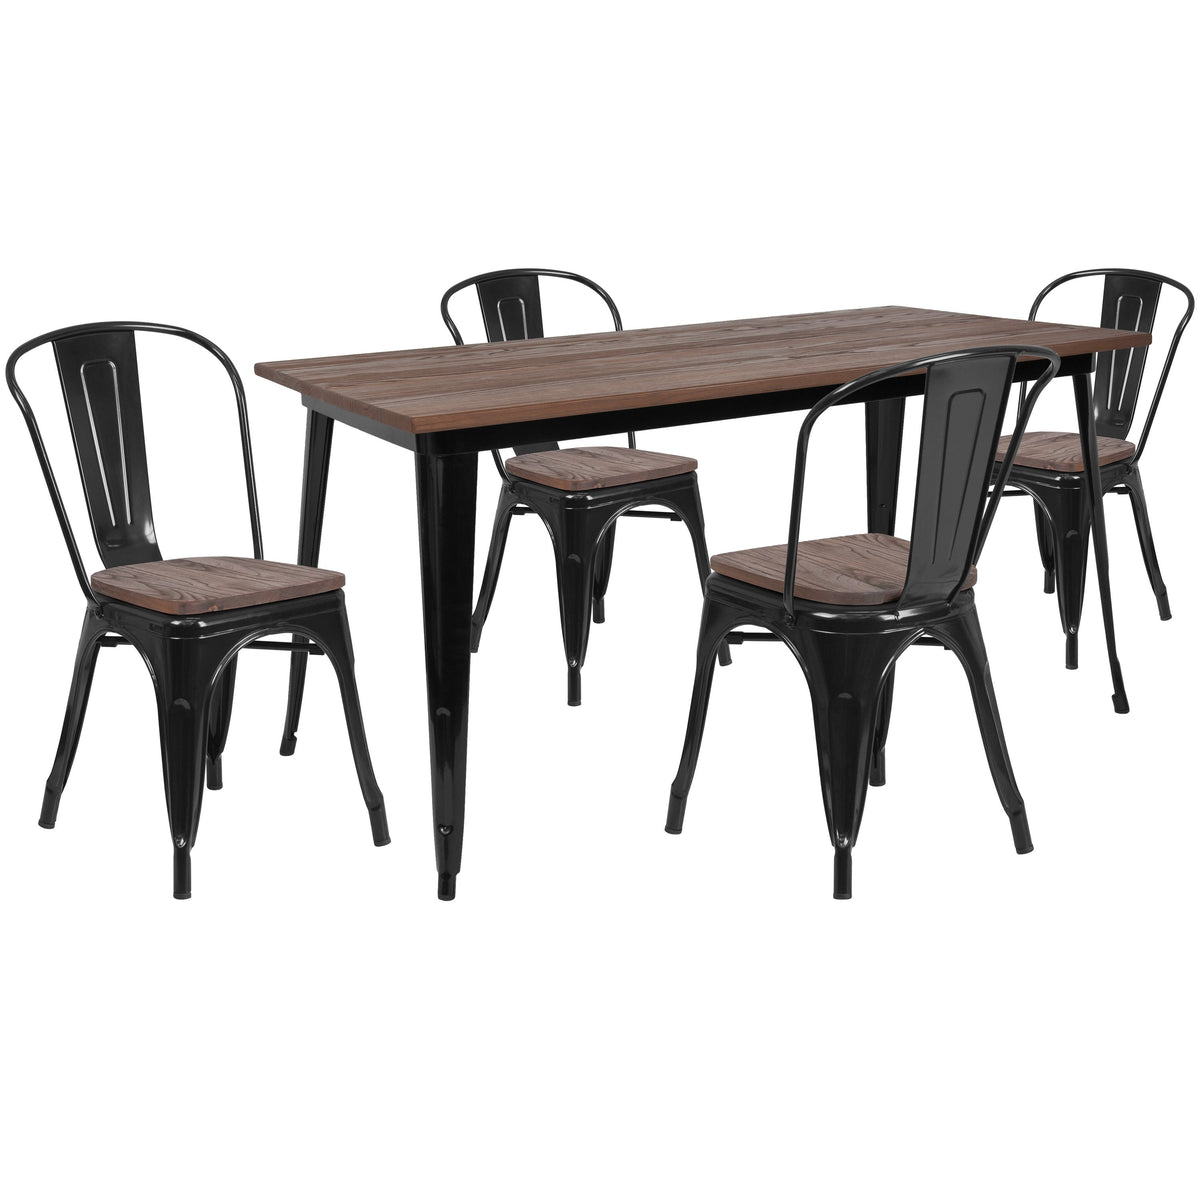 Black |#| 30.25inch x 60inch Black Metal Table Set with Wood Top and 4 Stack Chairs